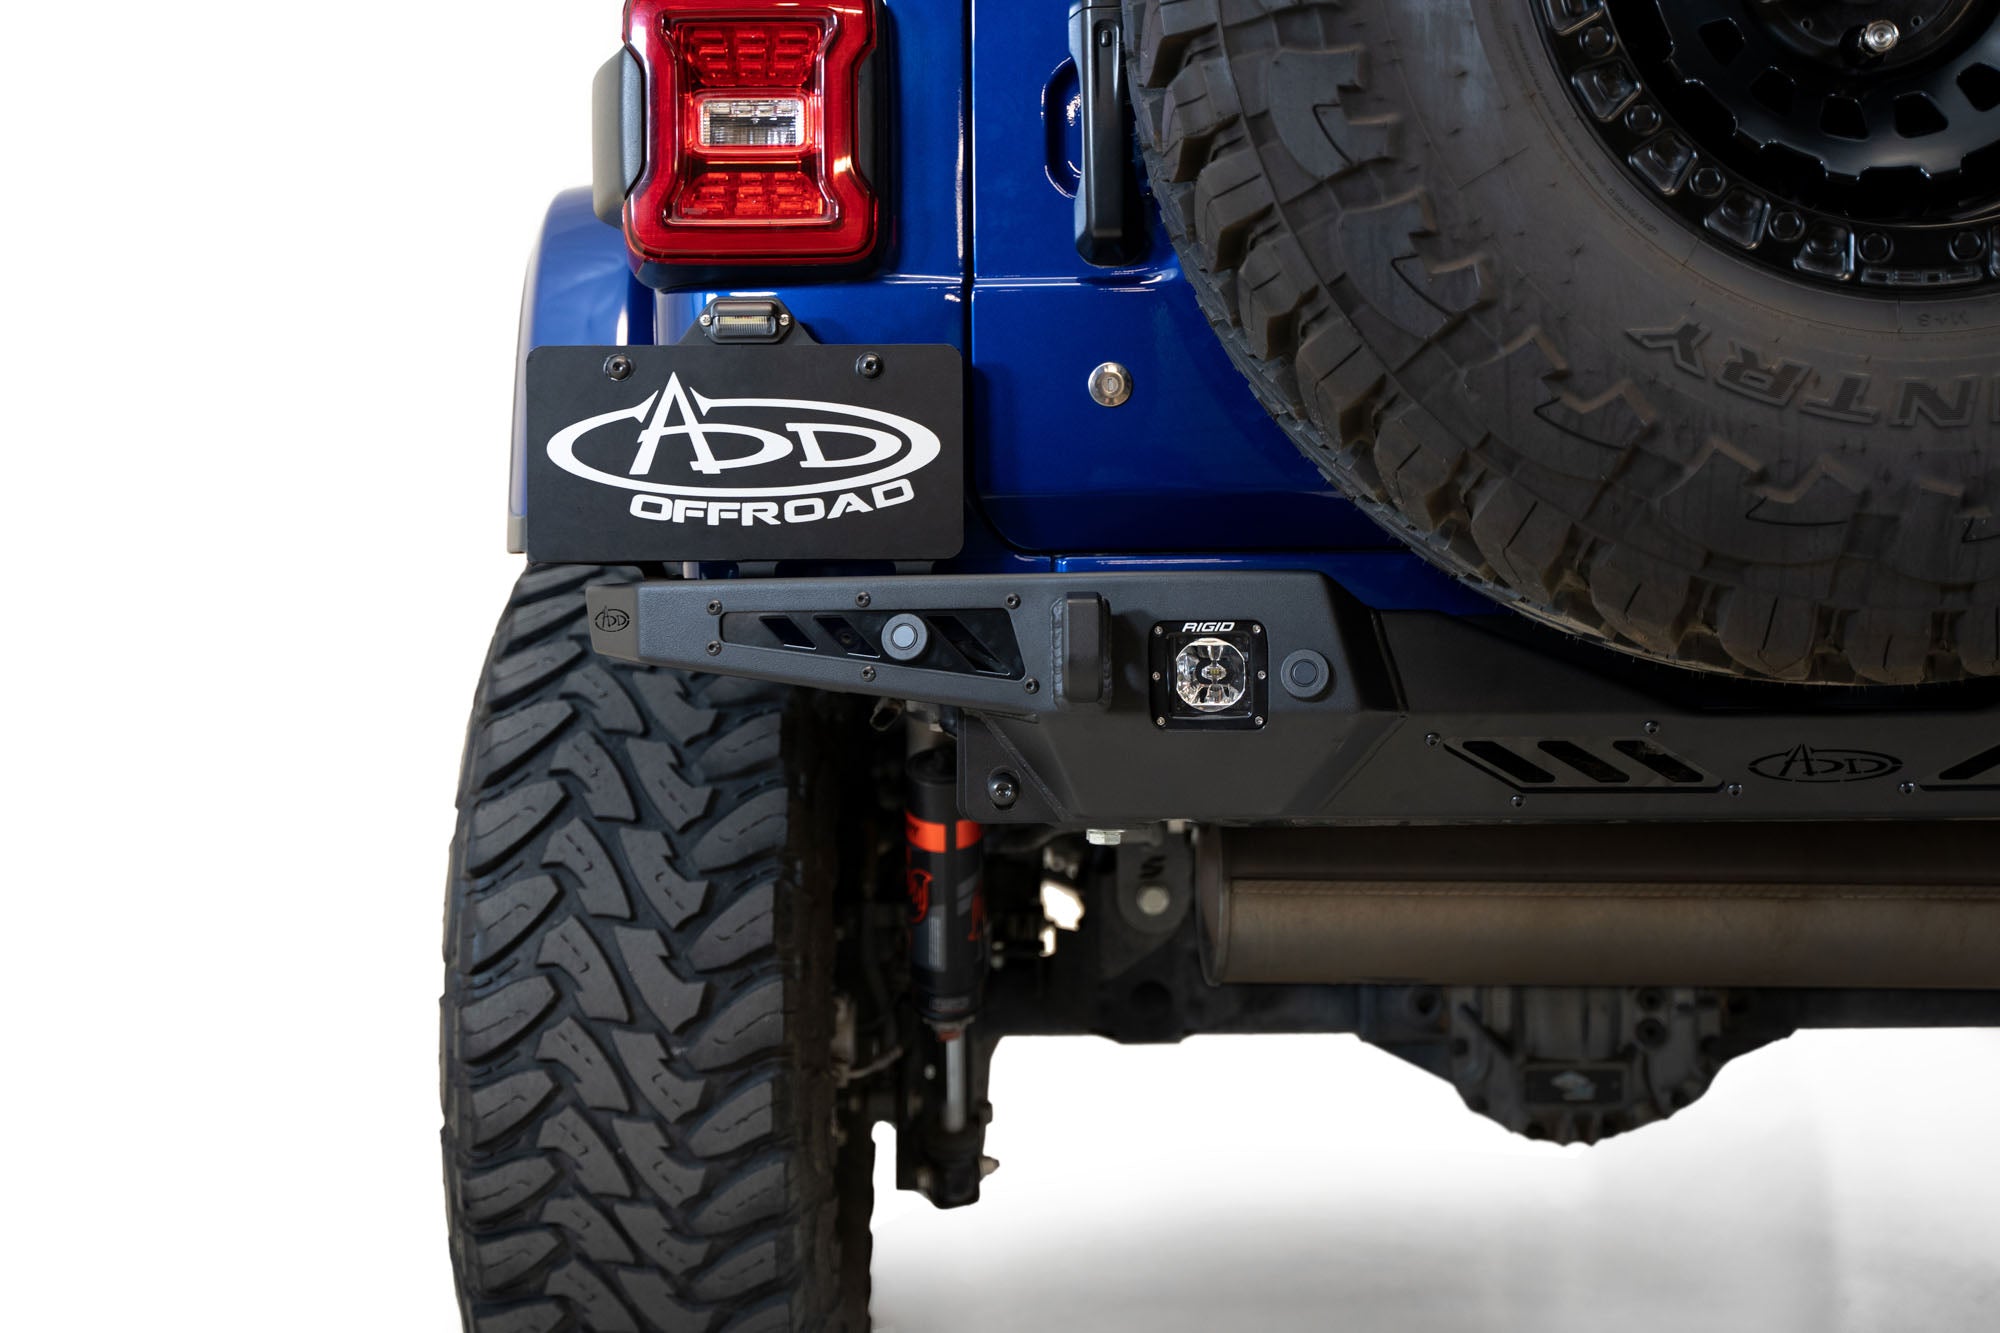 Light pod intalled on the Stealth Fighter Rear Bumper for the Jeep Wrangler JL